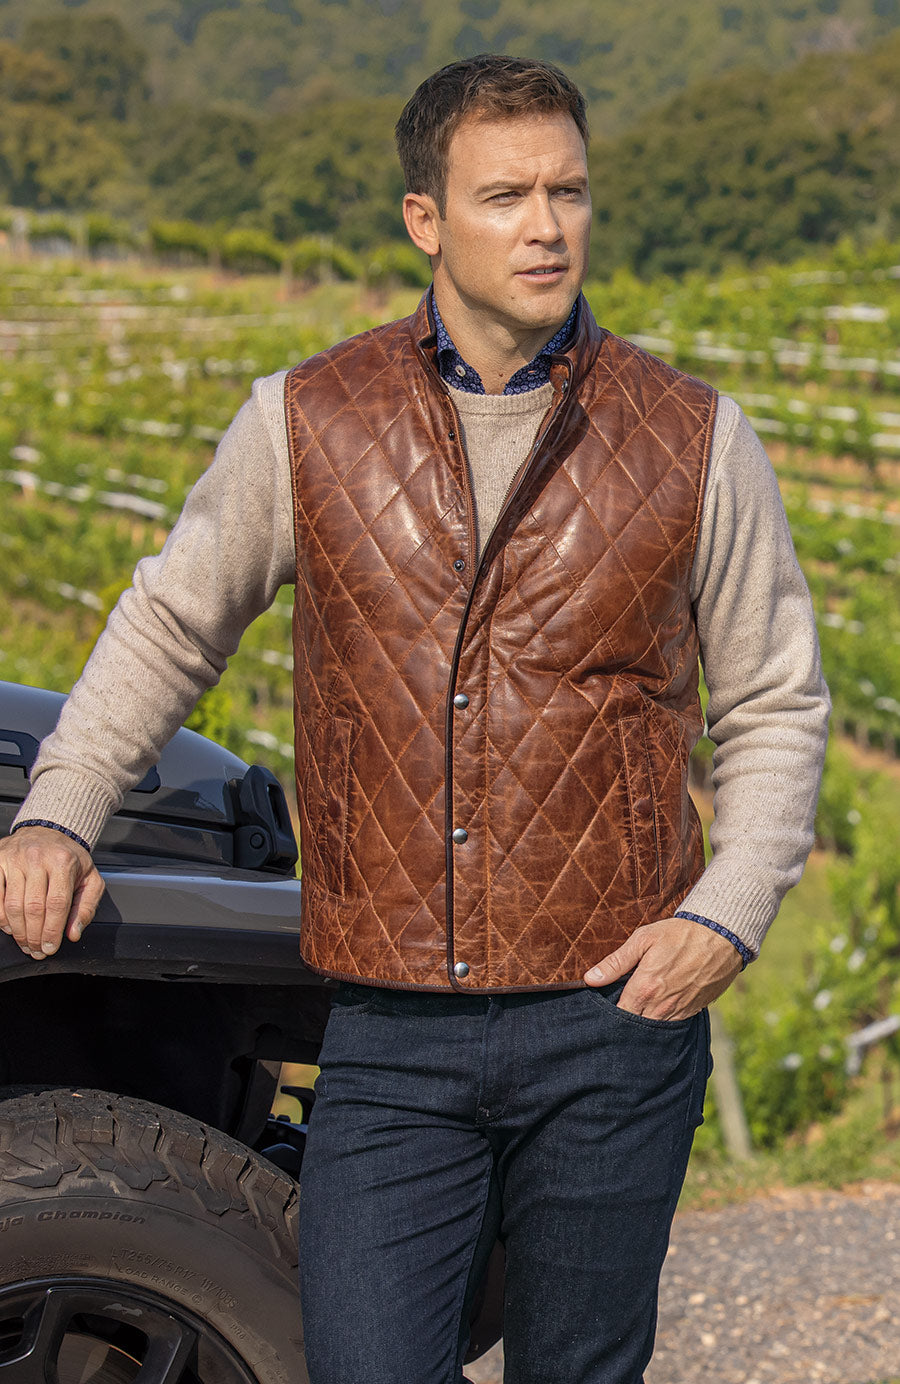 male model wearing leather vest standing in front of vineyard